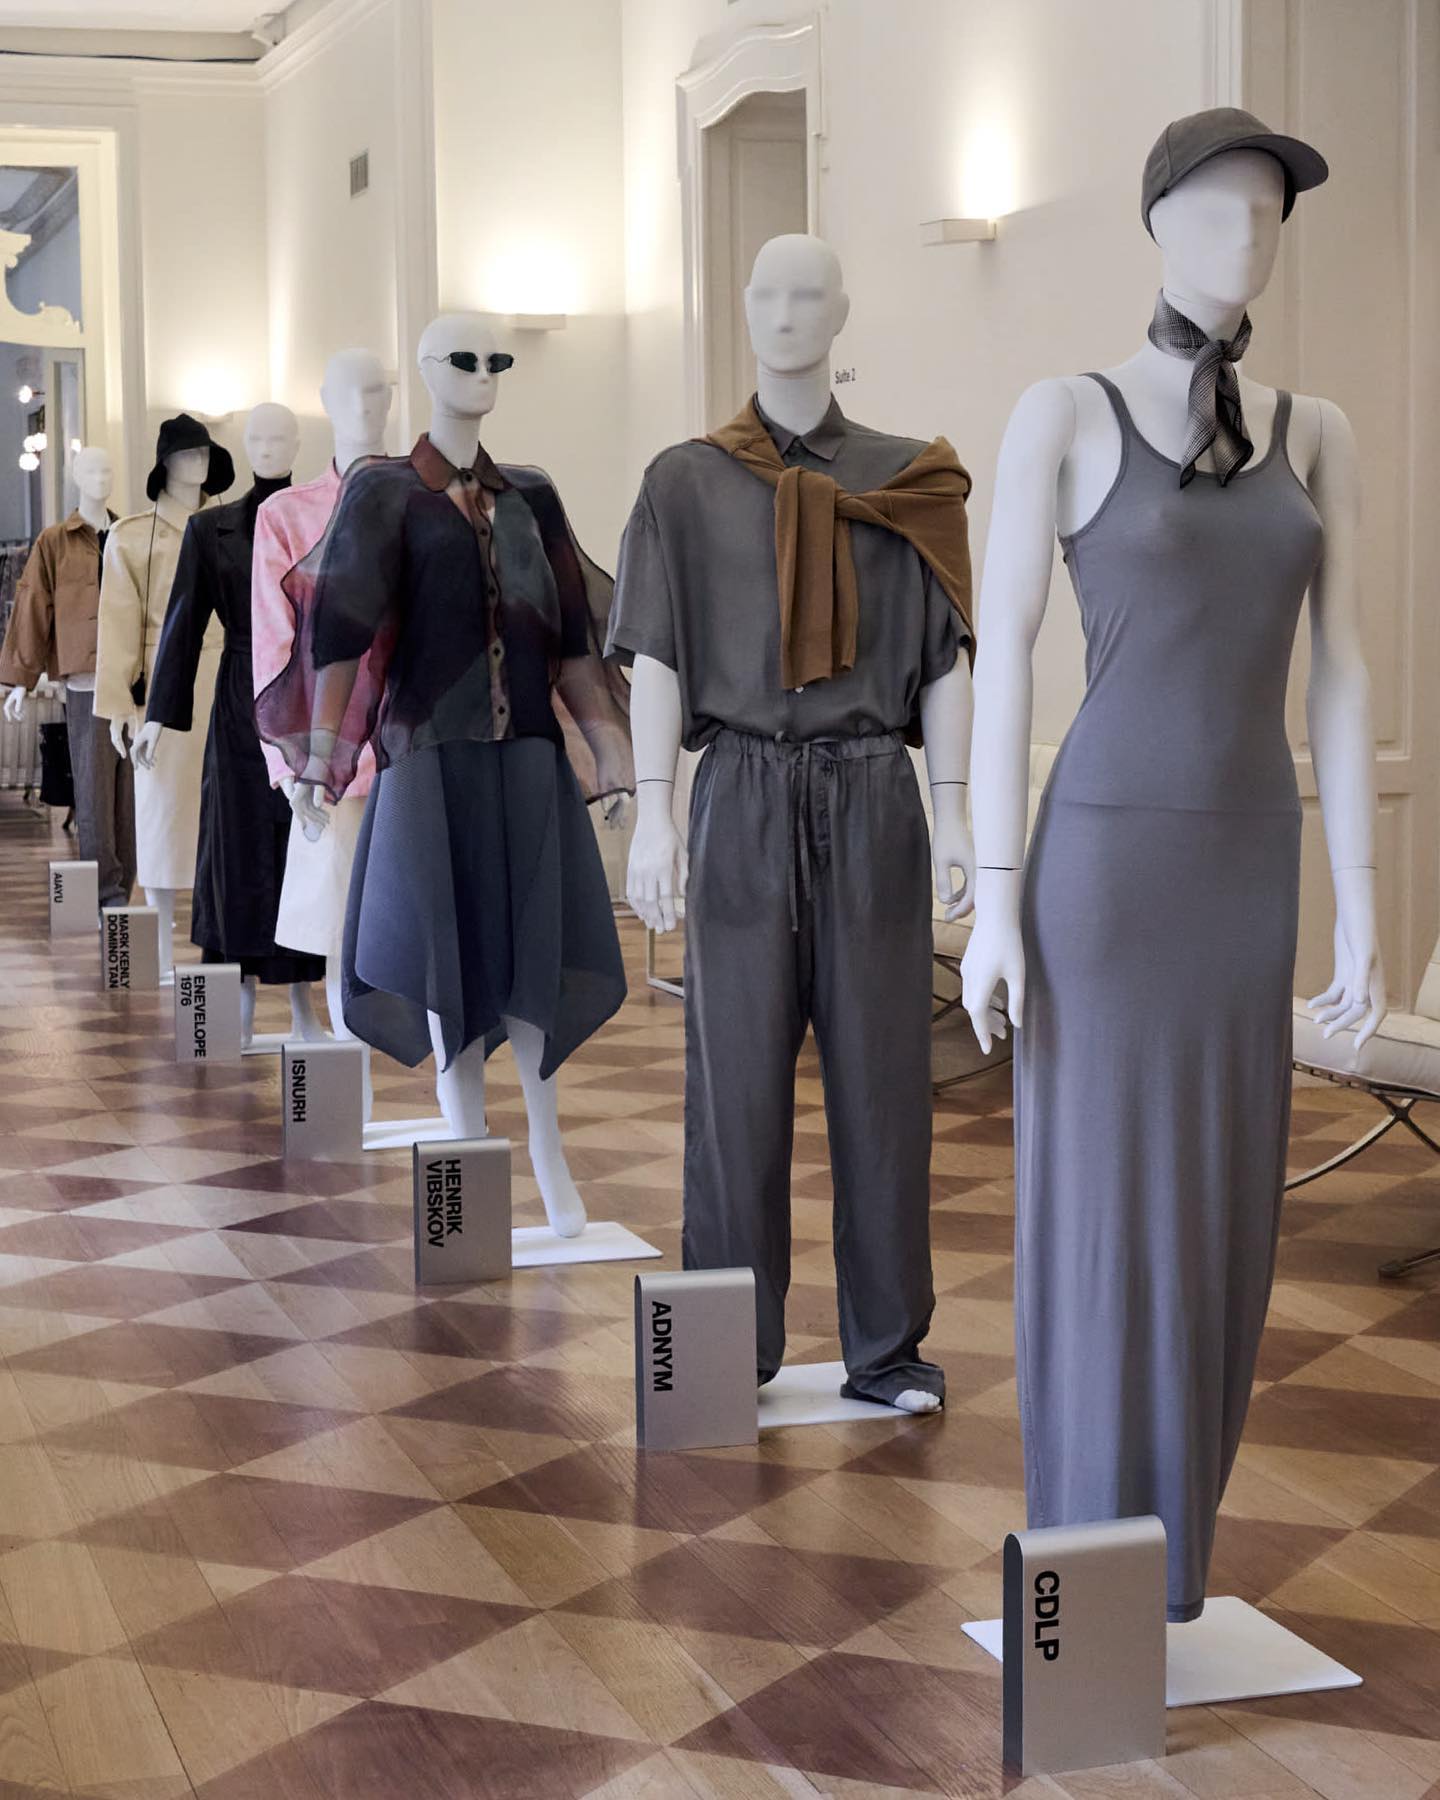 Luxe.CO Interviews with CIFF Members: Nordic Fashion Trends in Milan